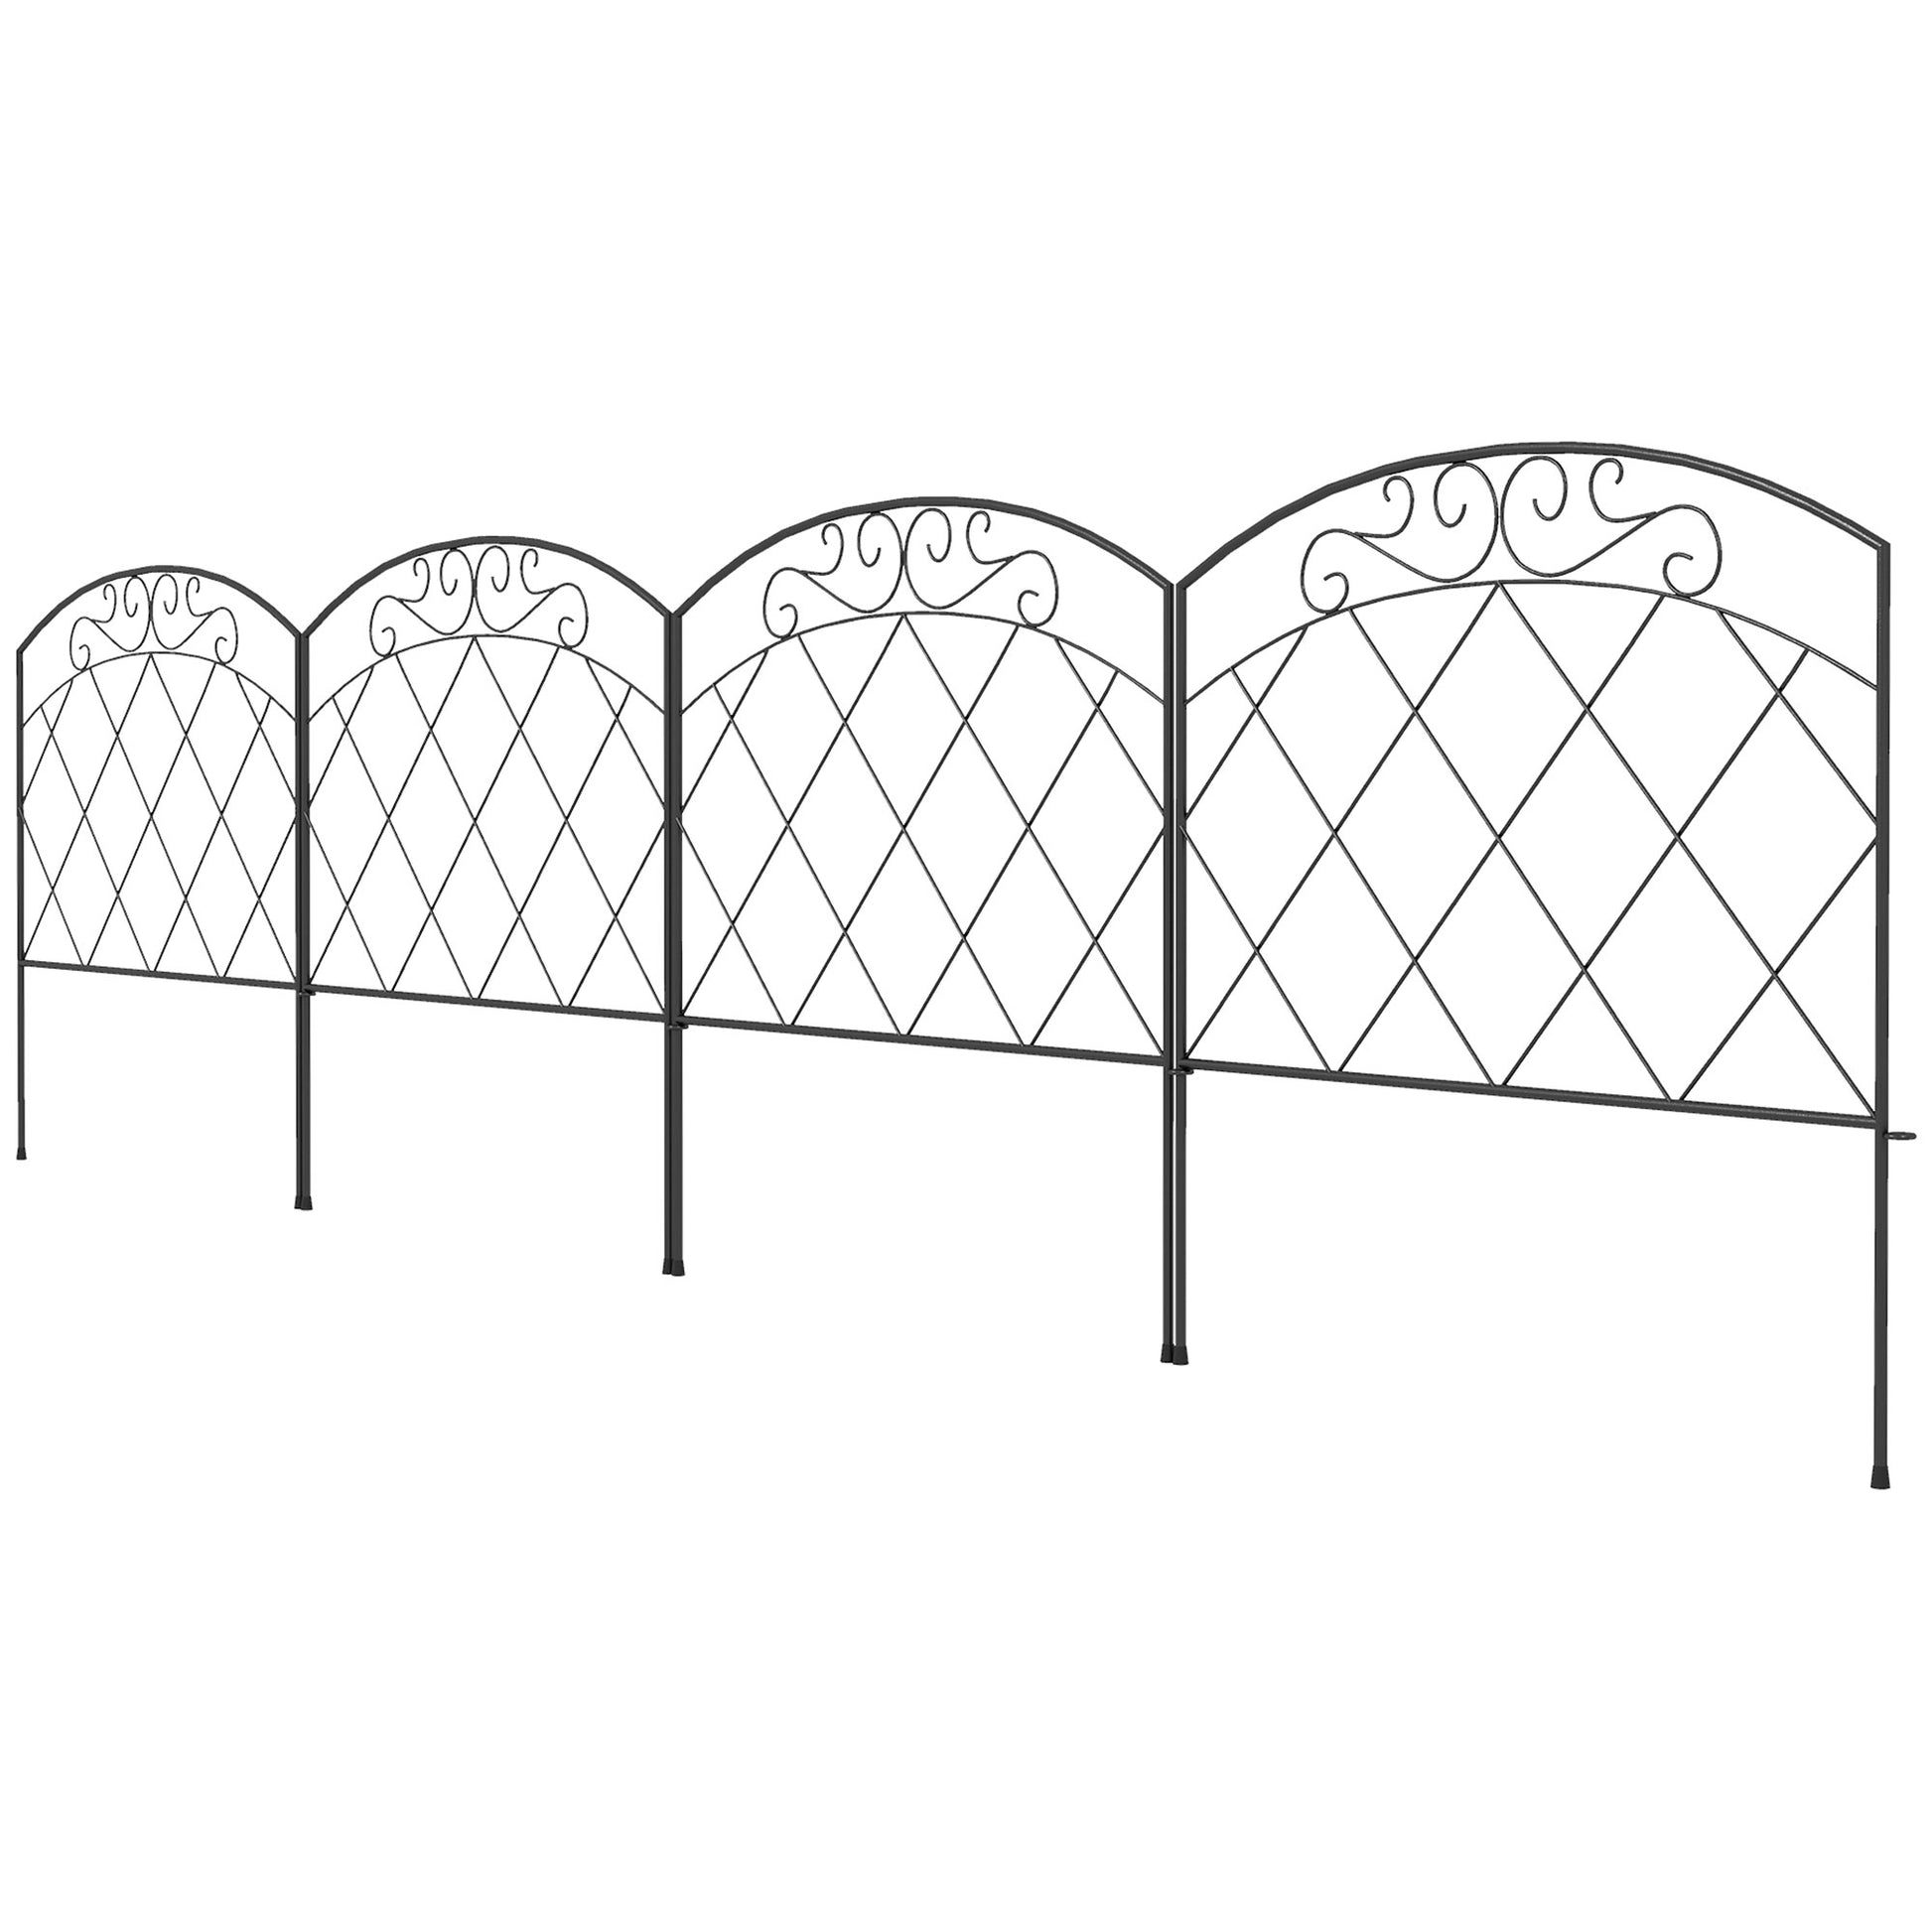 4 Pack Garden Fencing for Yard, Decorative Fence Panels as Animal Barrier and Flower Edging, Swirls at Gallery Canada